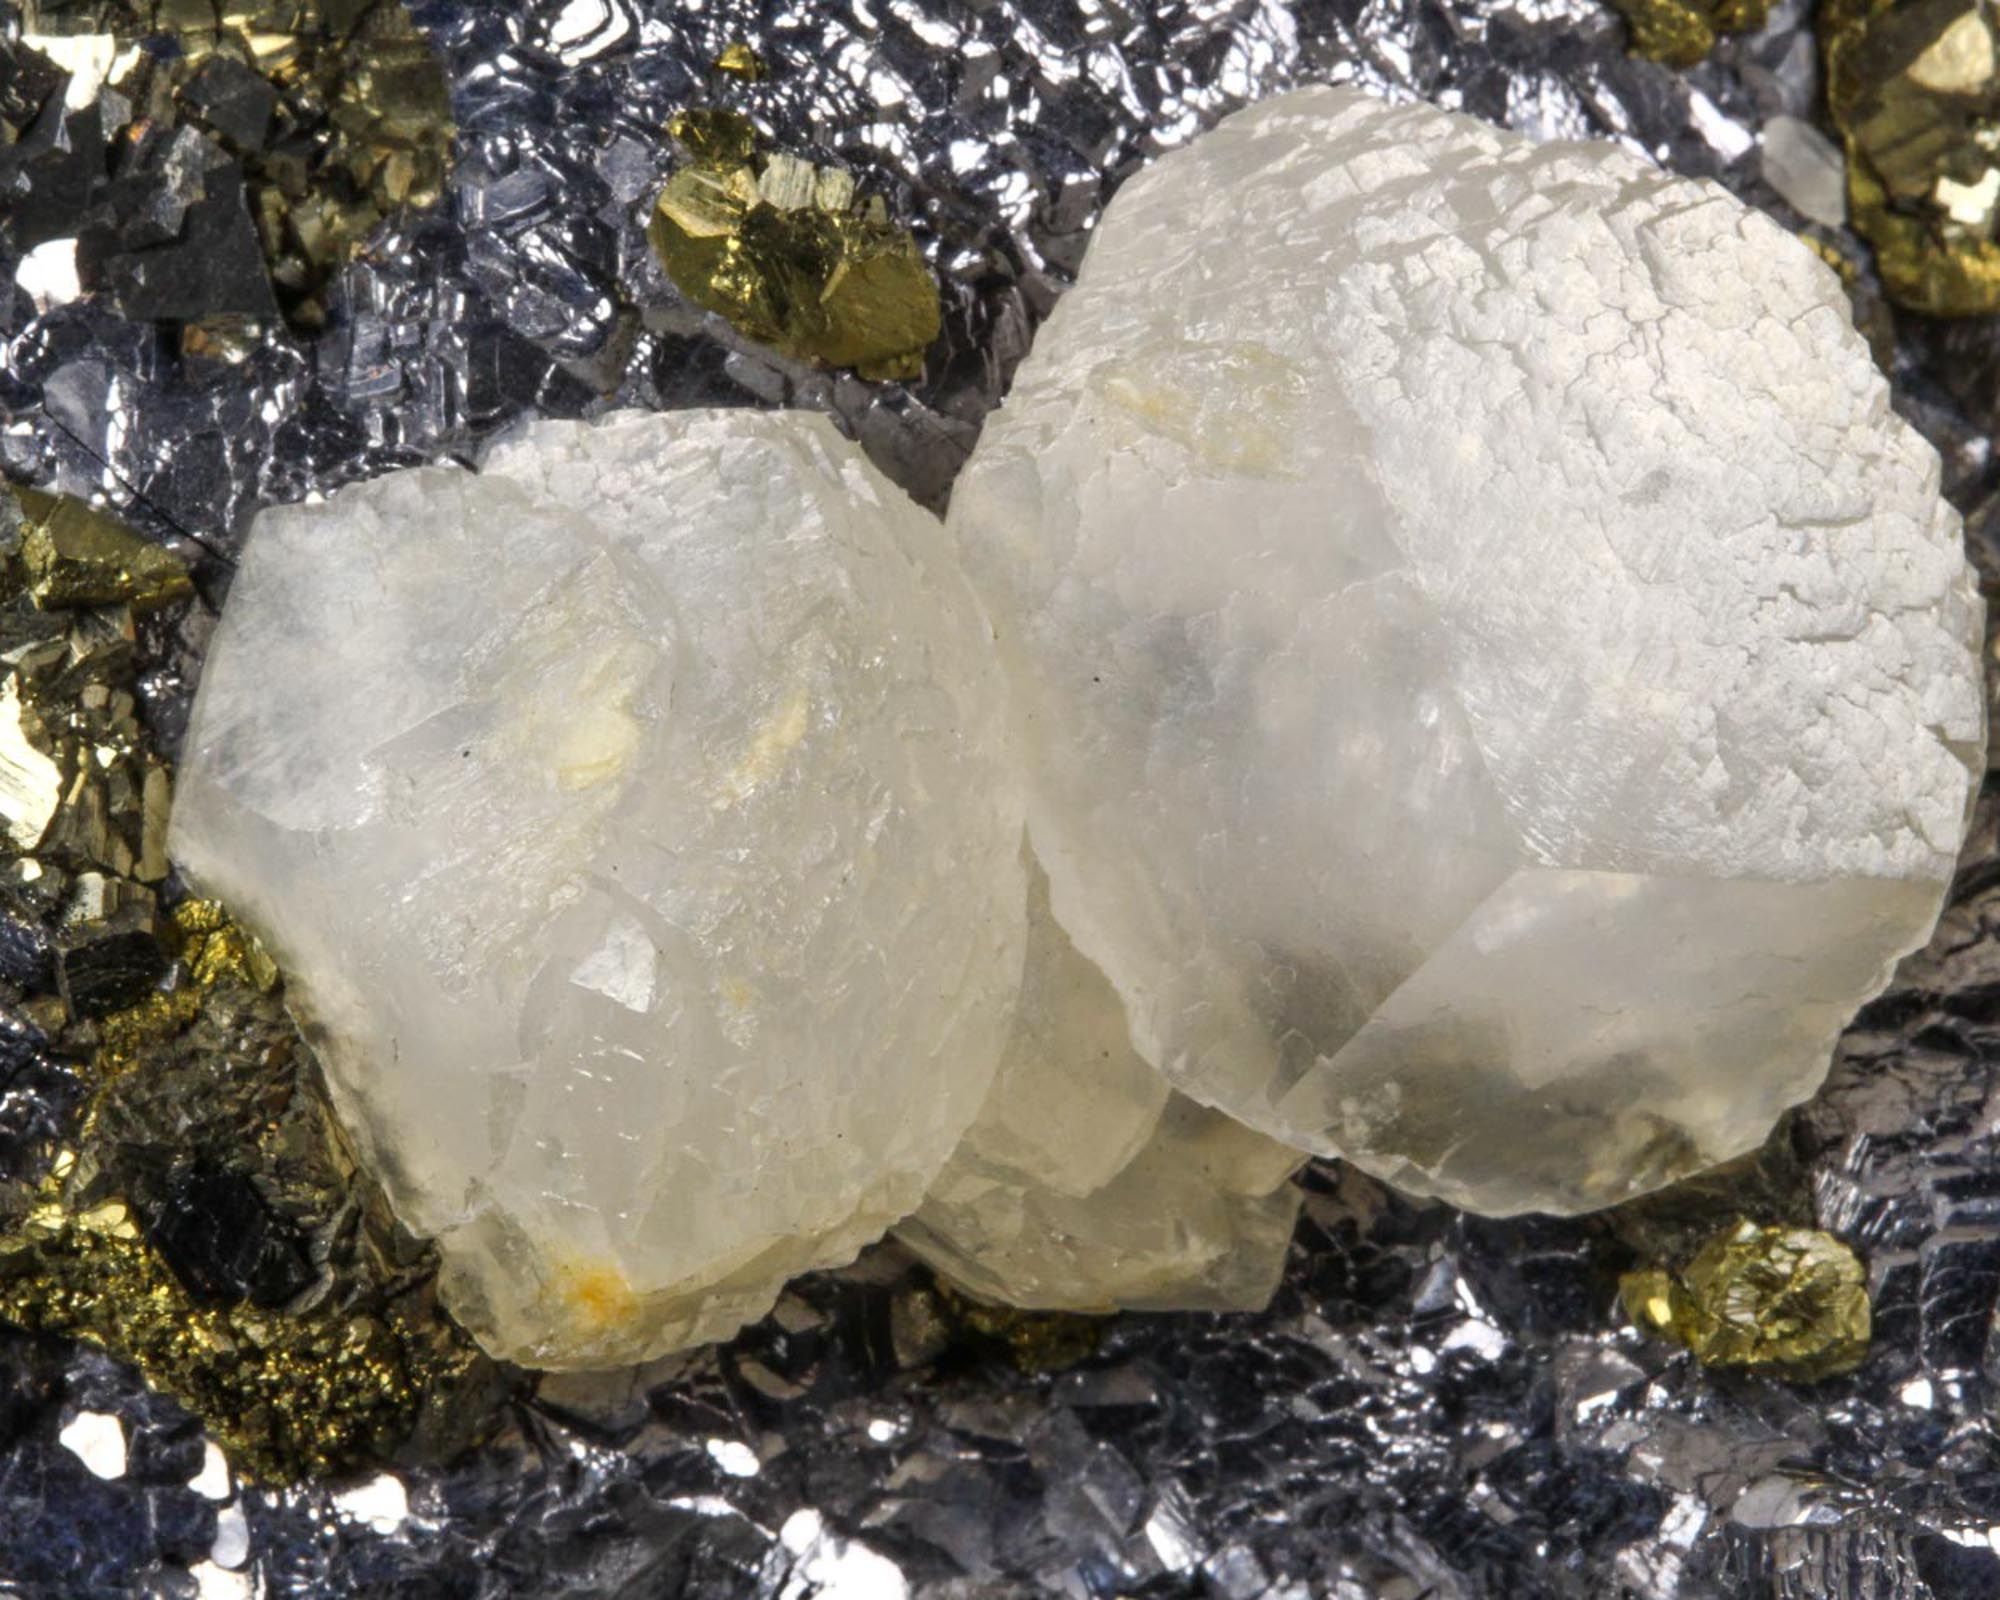 Calcite on Galena and Pyrite